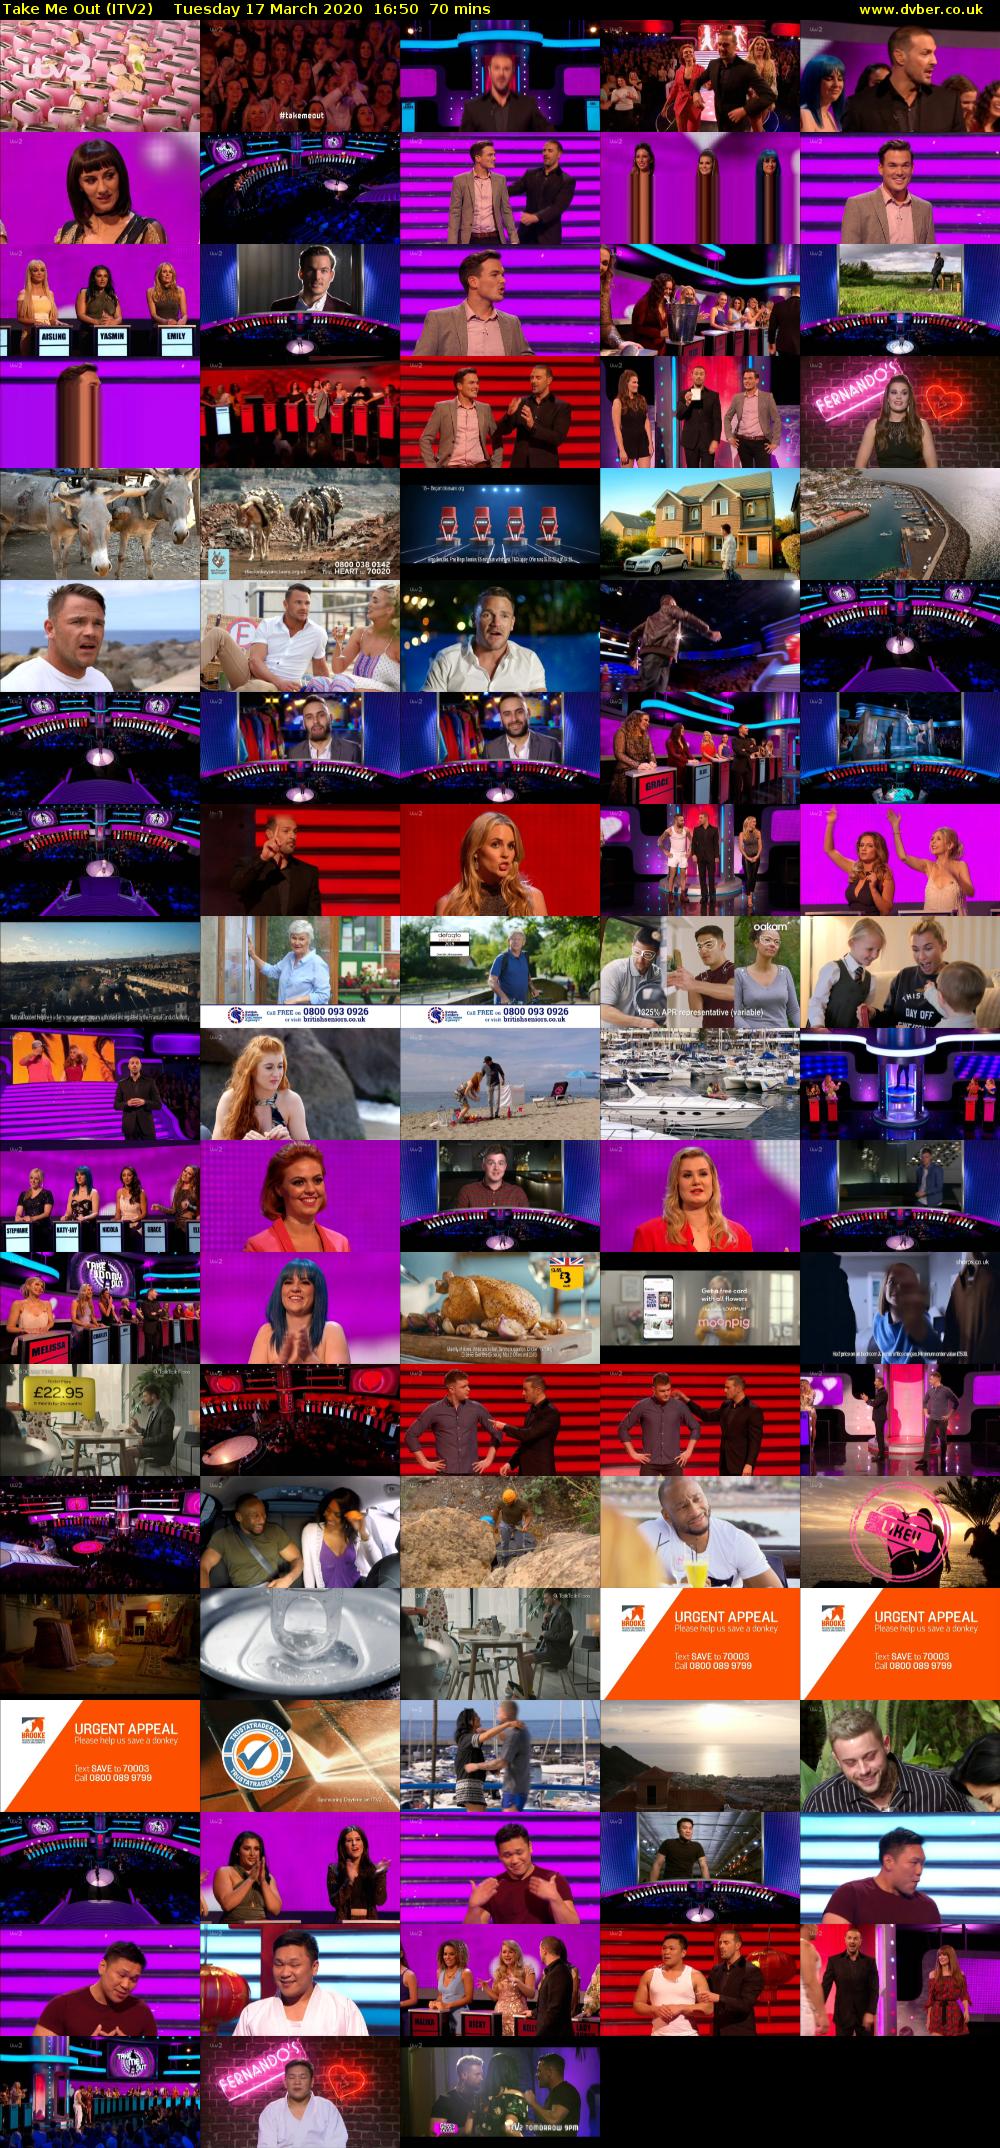 Take Me Out (ITV2) Tuesday 17 March 2020 16:50 - 18:00